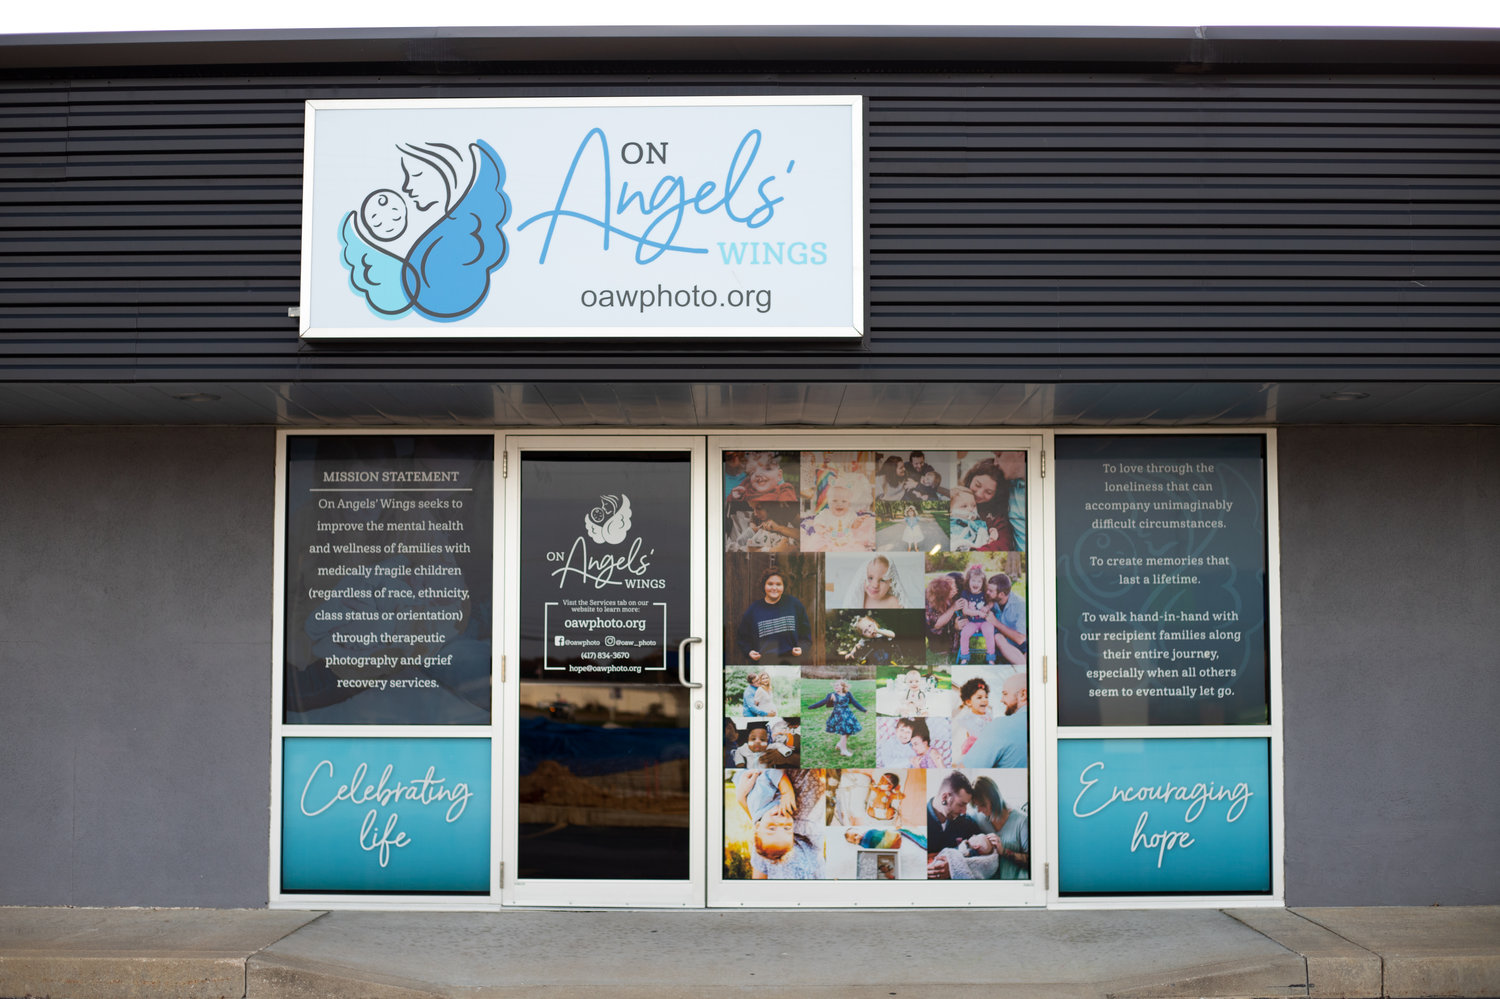 On Angels' Wings operates in Meadow Lark Plaza.